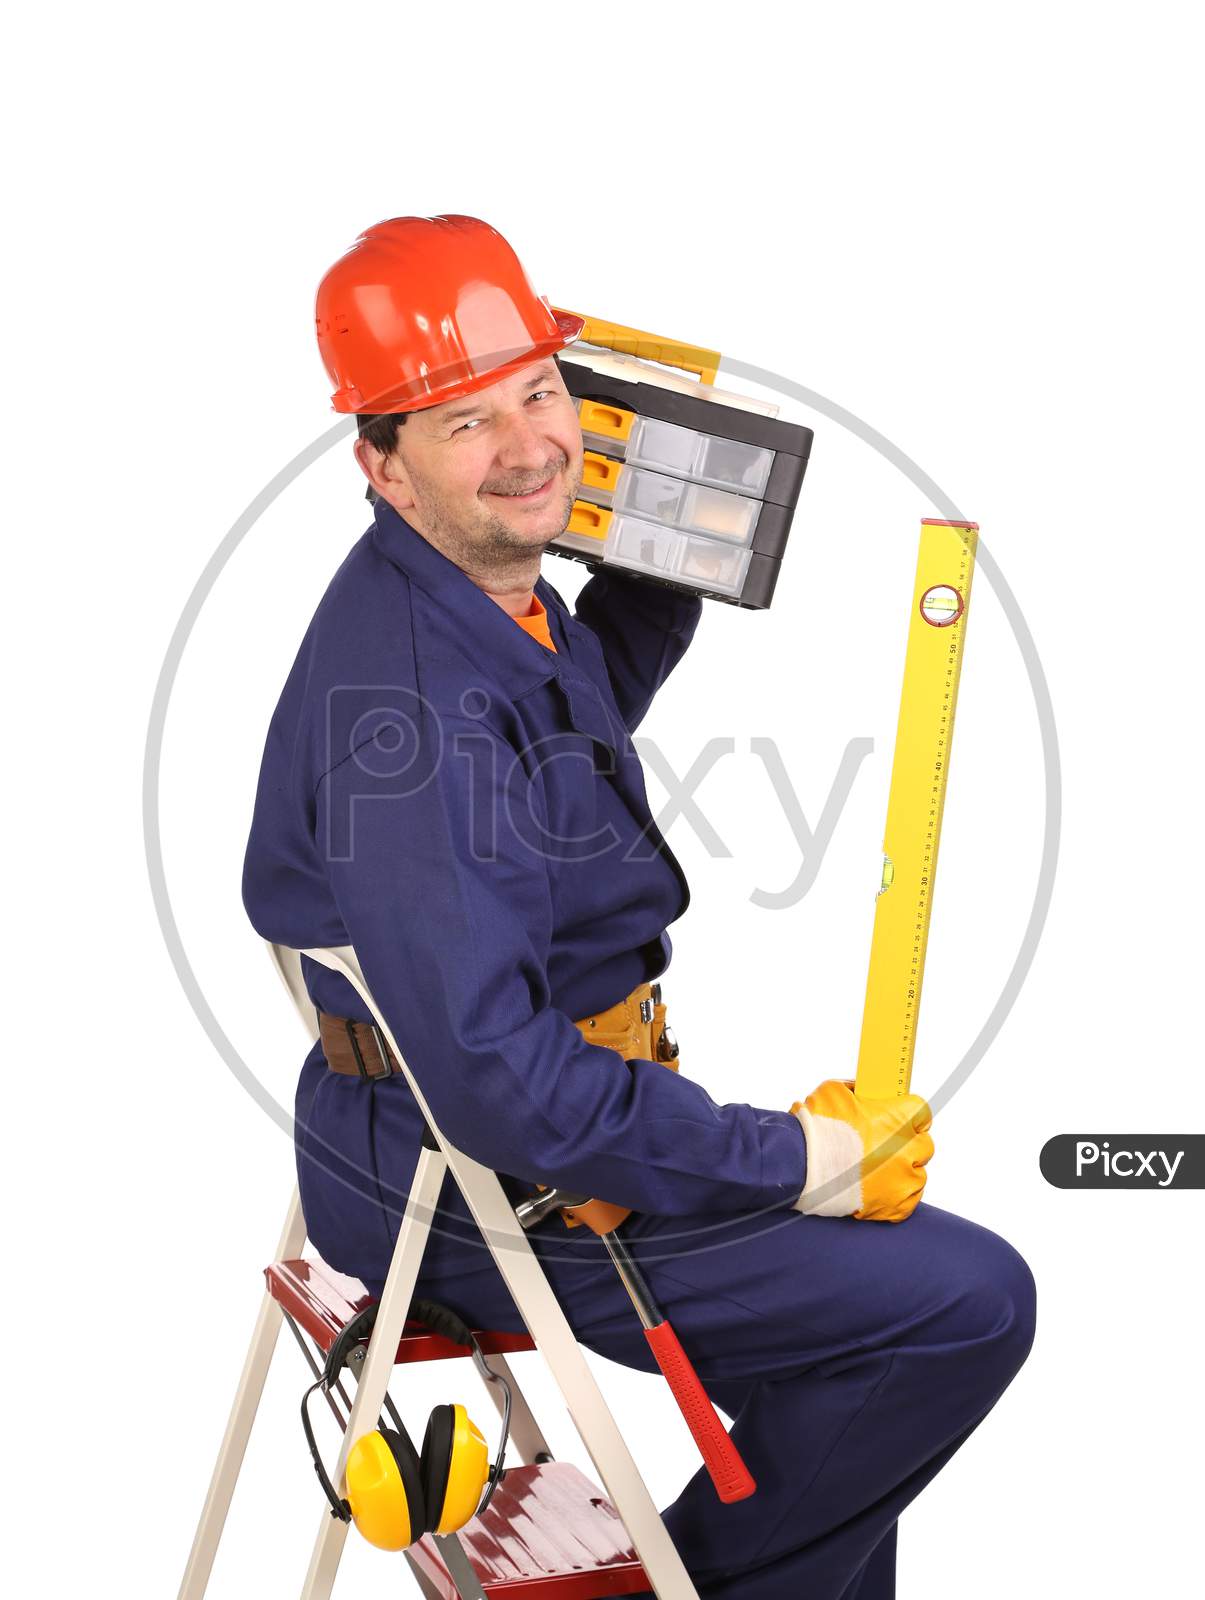 Worker On Ladder With Tool And Toolbox.  Isolated On A White Background.